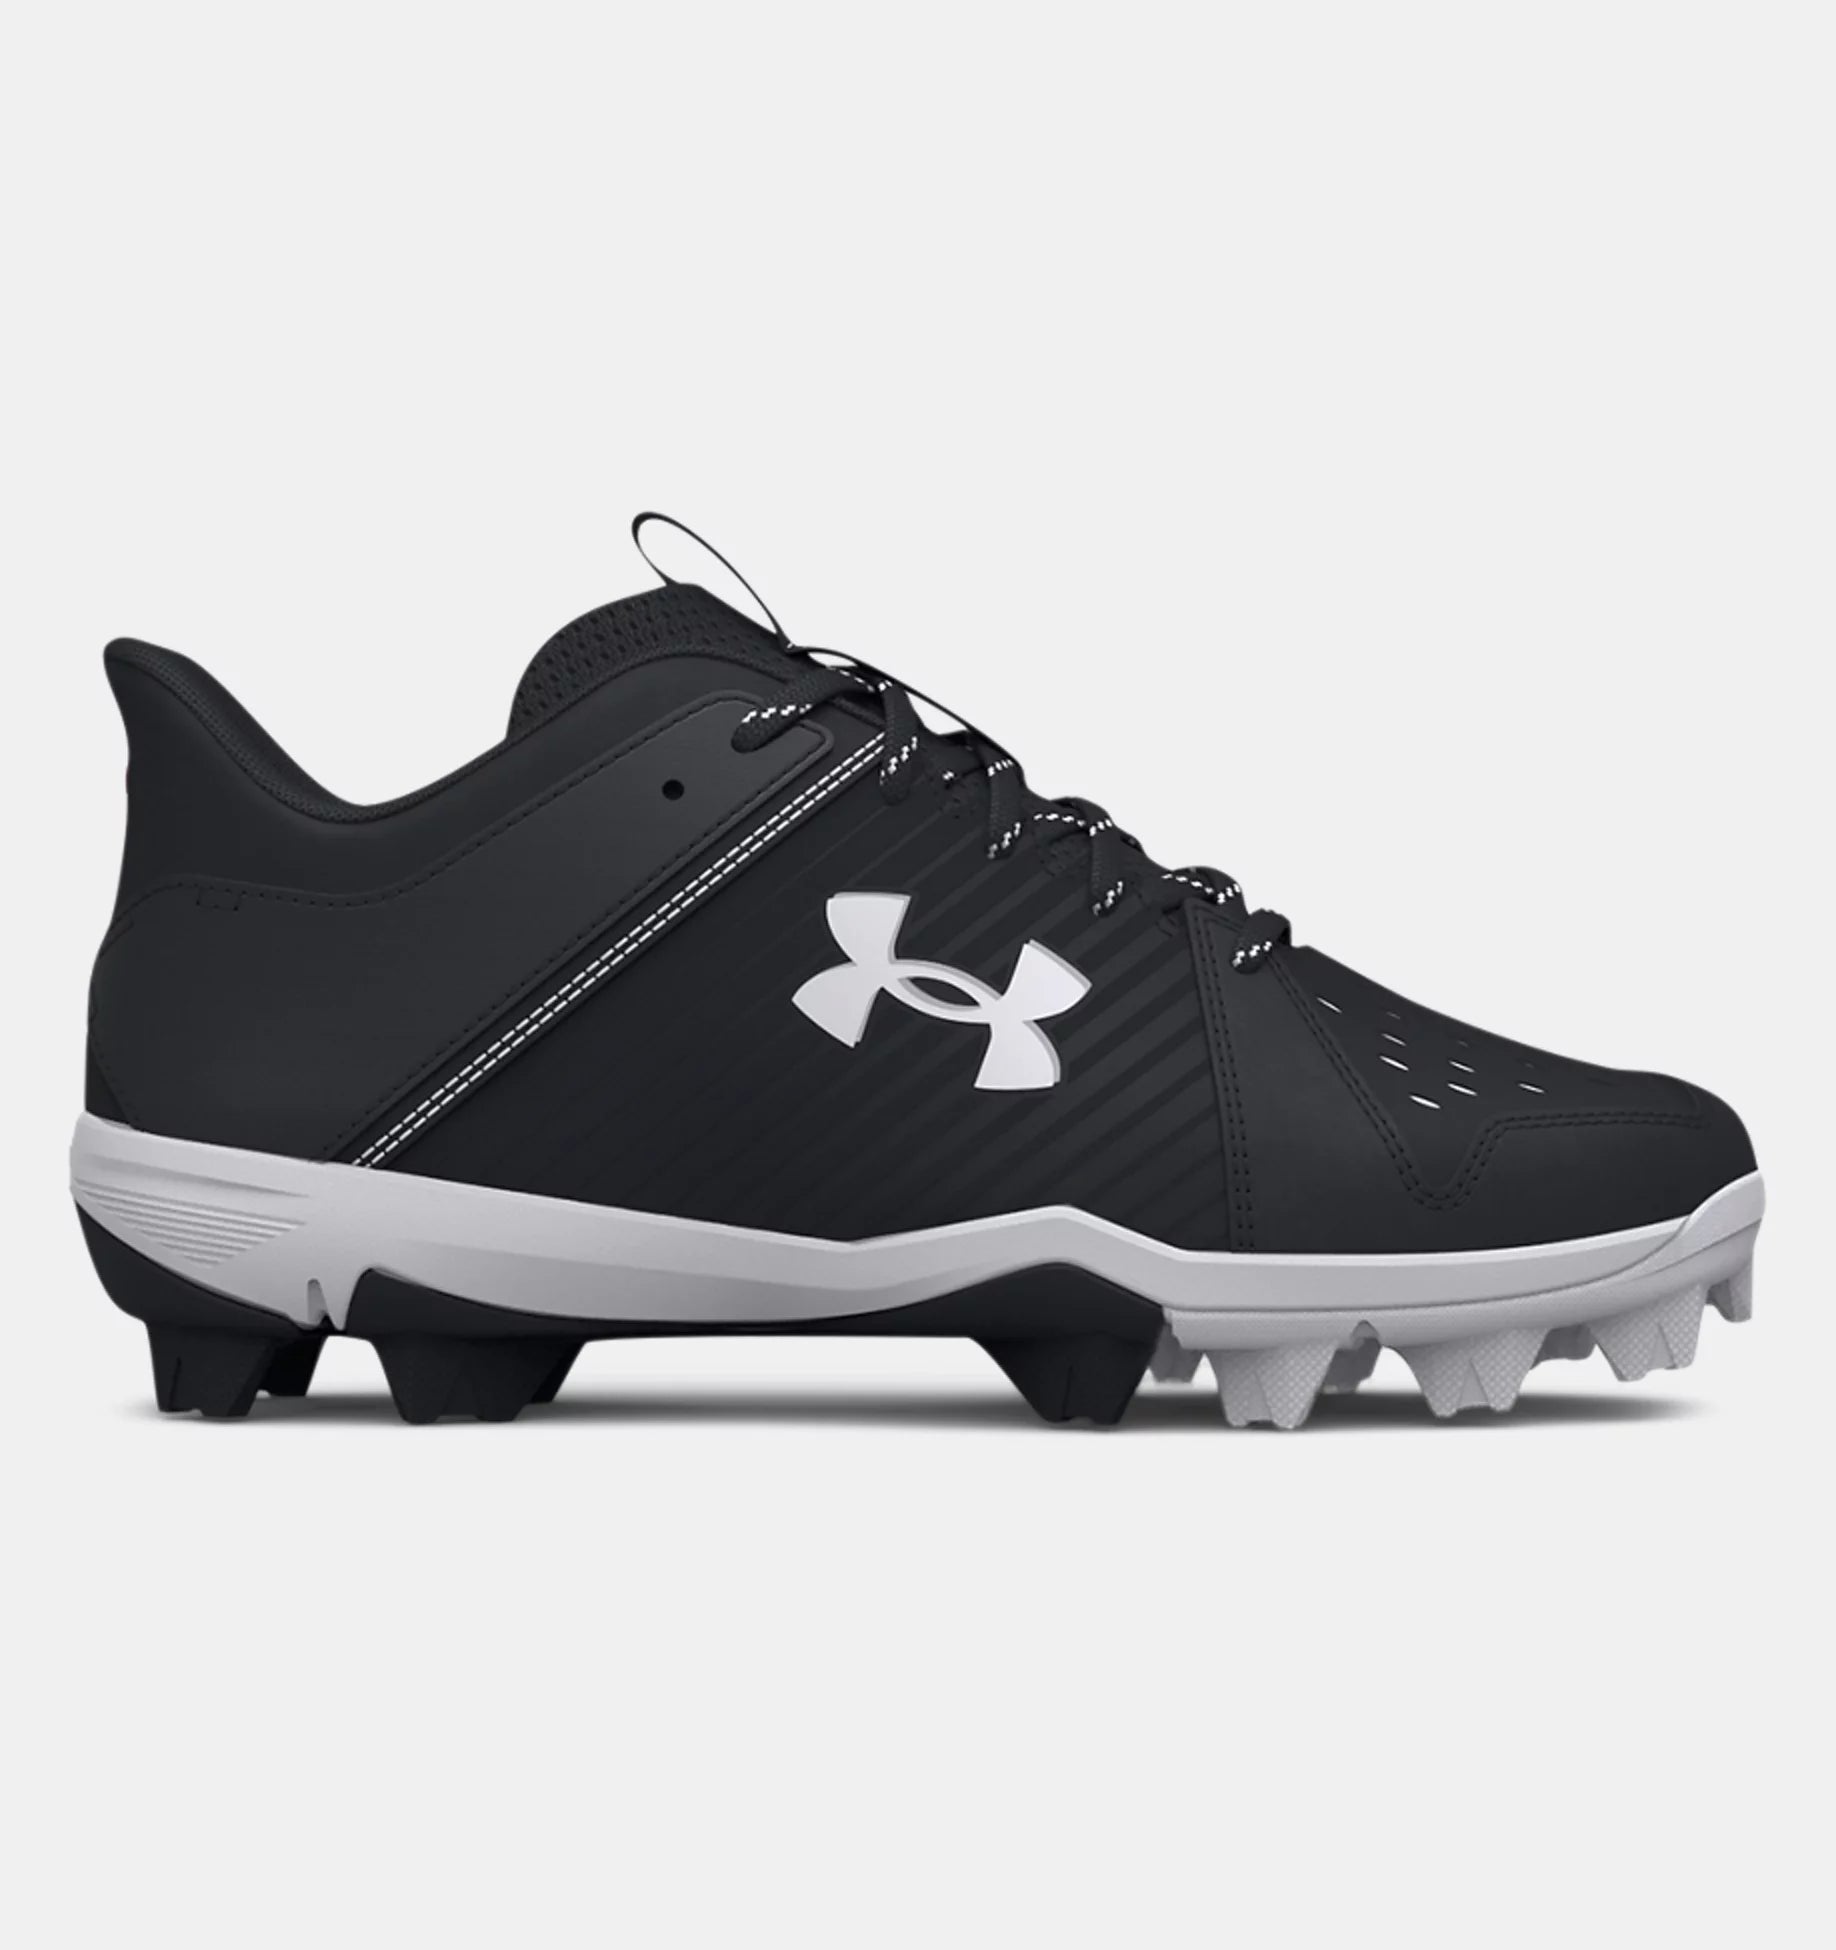 Under Armour Tactical Boots Just $32.48 Shipped (Regularly $80)